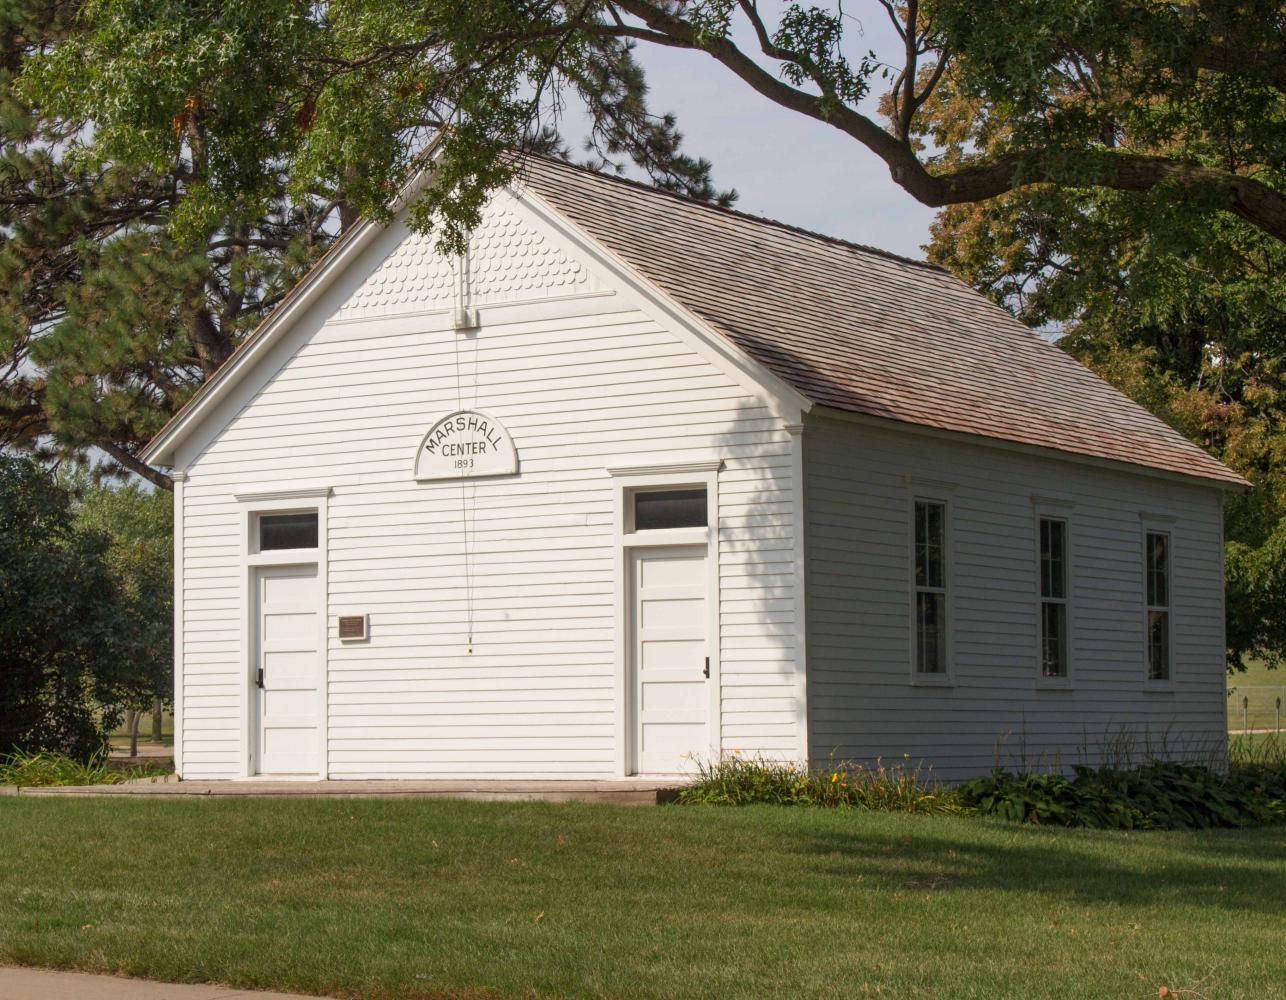 One-room+schoolhouse+history+lesson